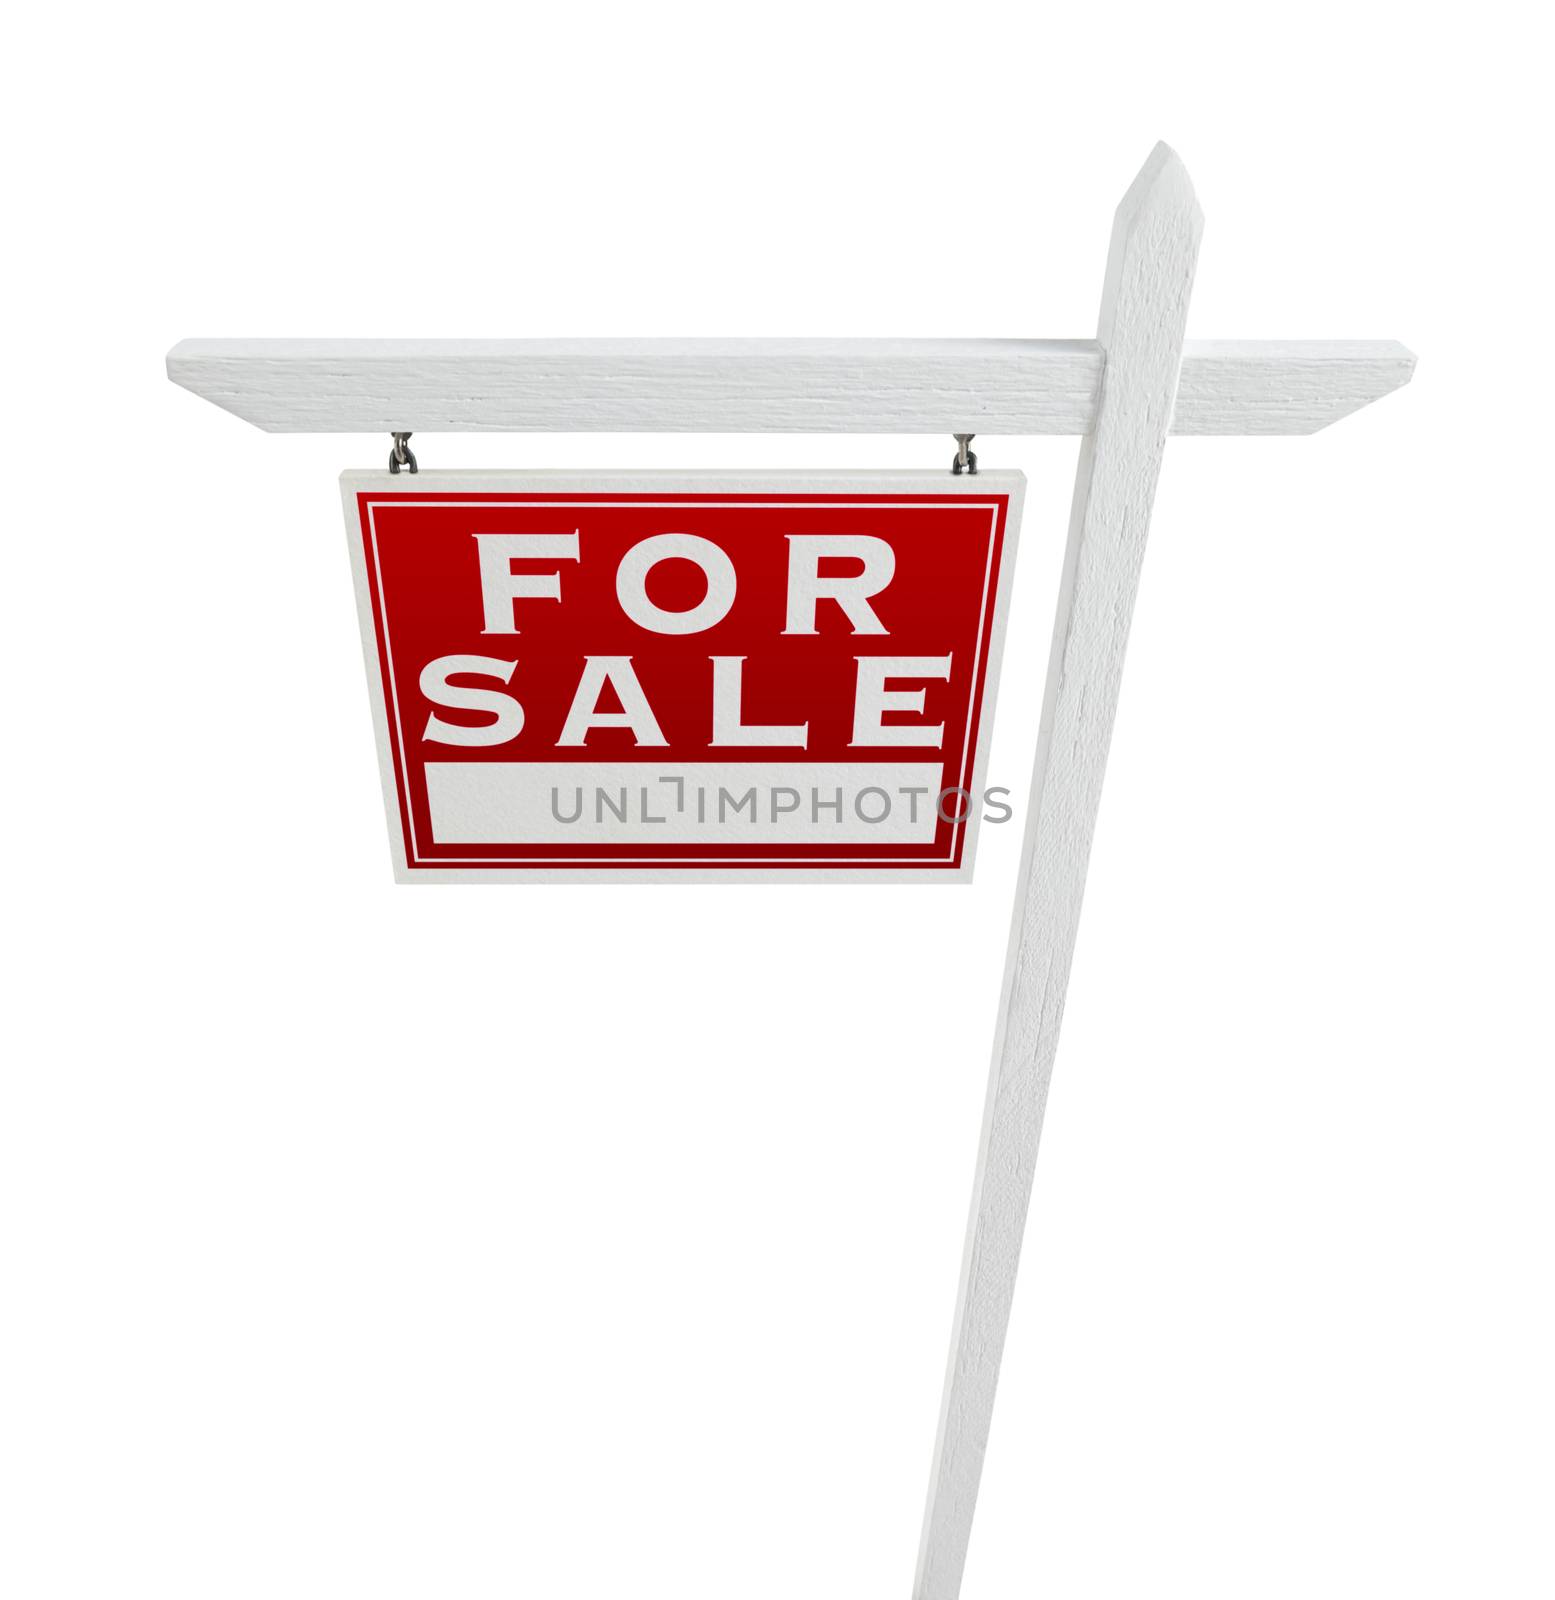 Left Facing For Sale Real Estate Sign Isolated on a White Background by Feverpitched